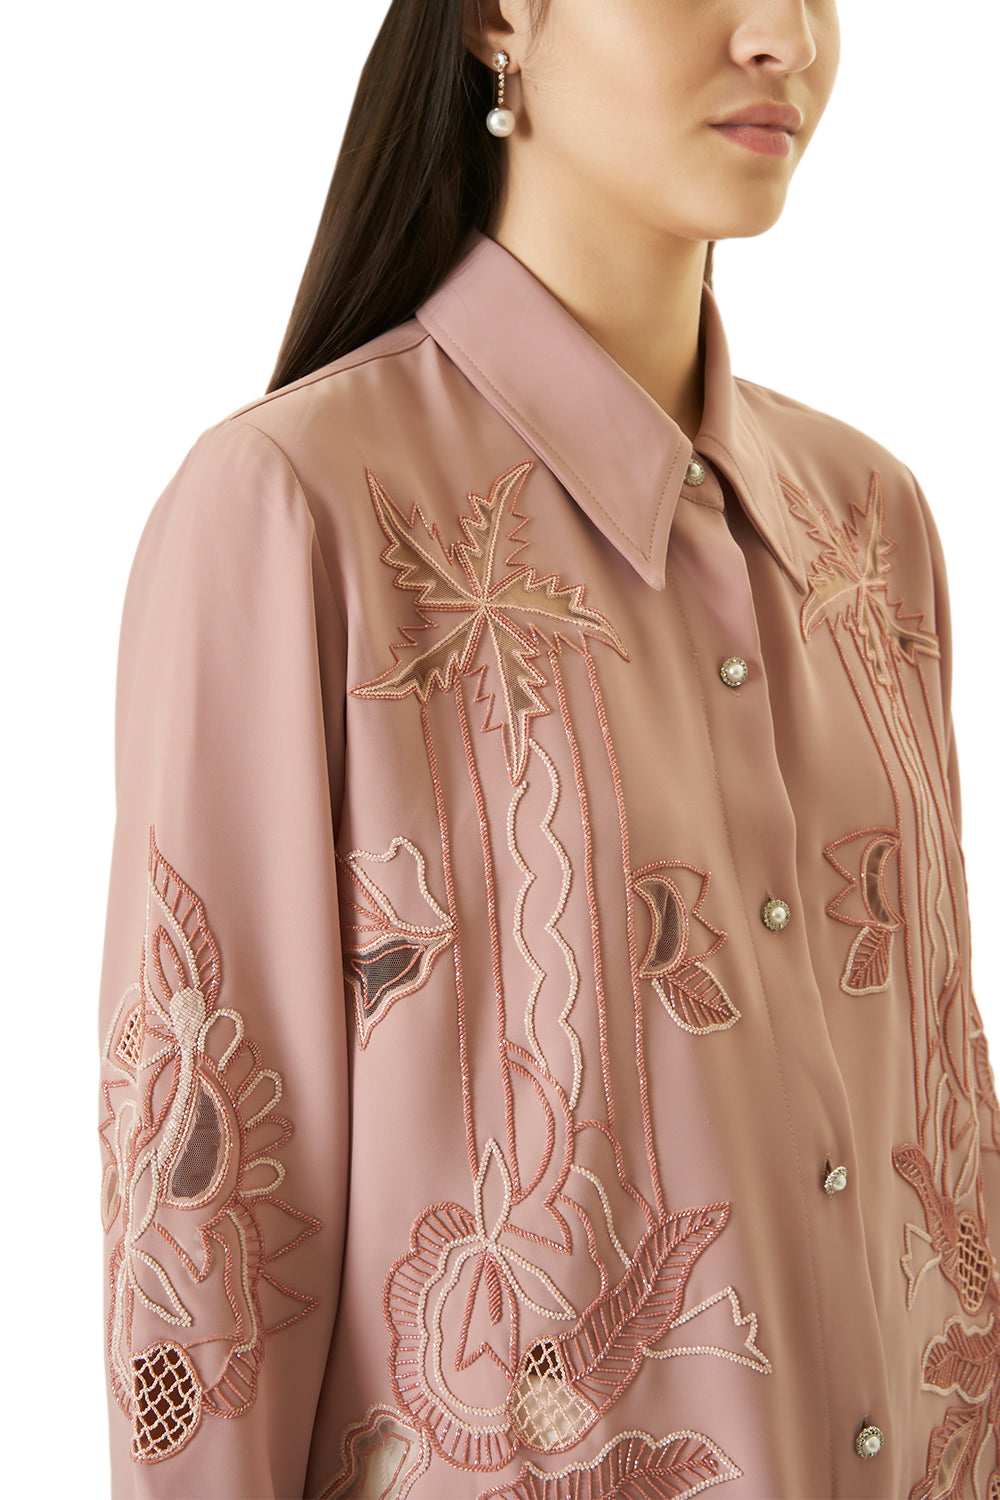 Pale Pink Cutwork Shirt with Beads